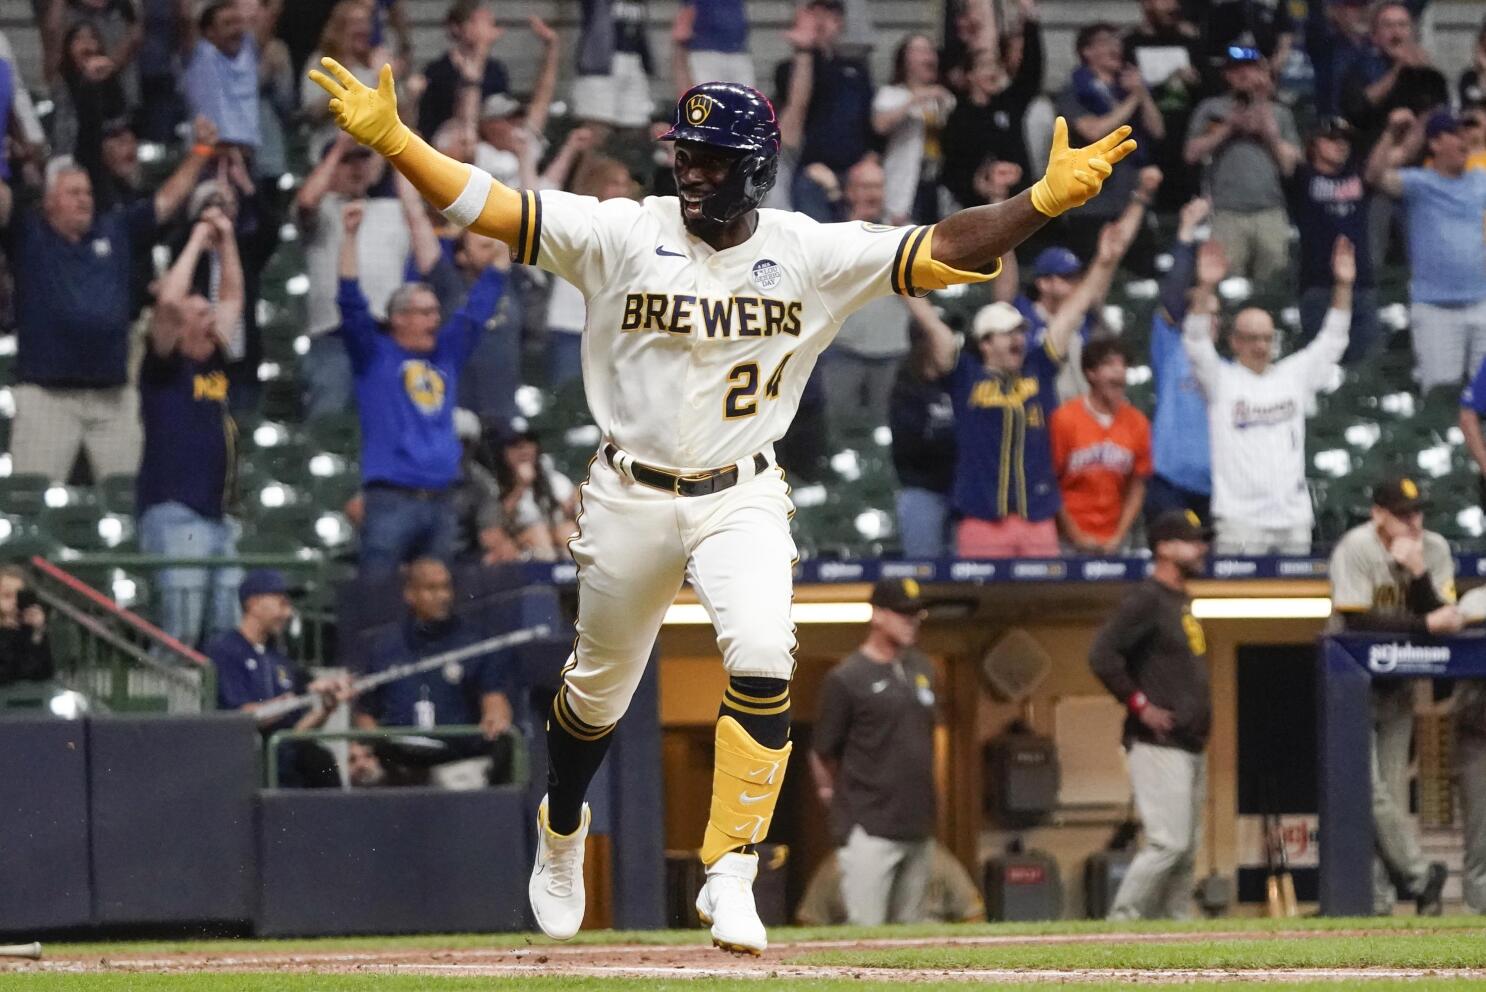 MLB News: Milwaukee Brewers Fans React To Brutal Walk-Off Loss Against Pittsburgh  Pirates